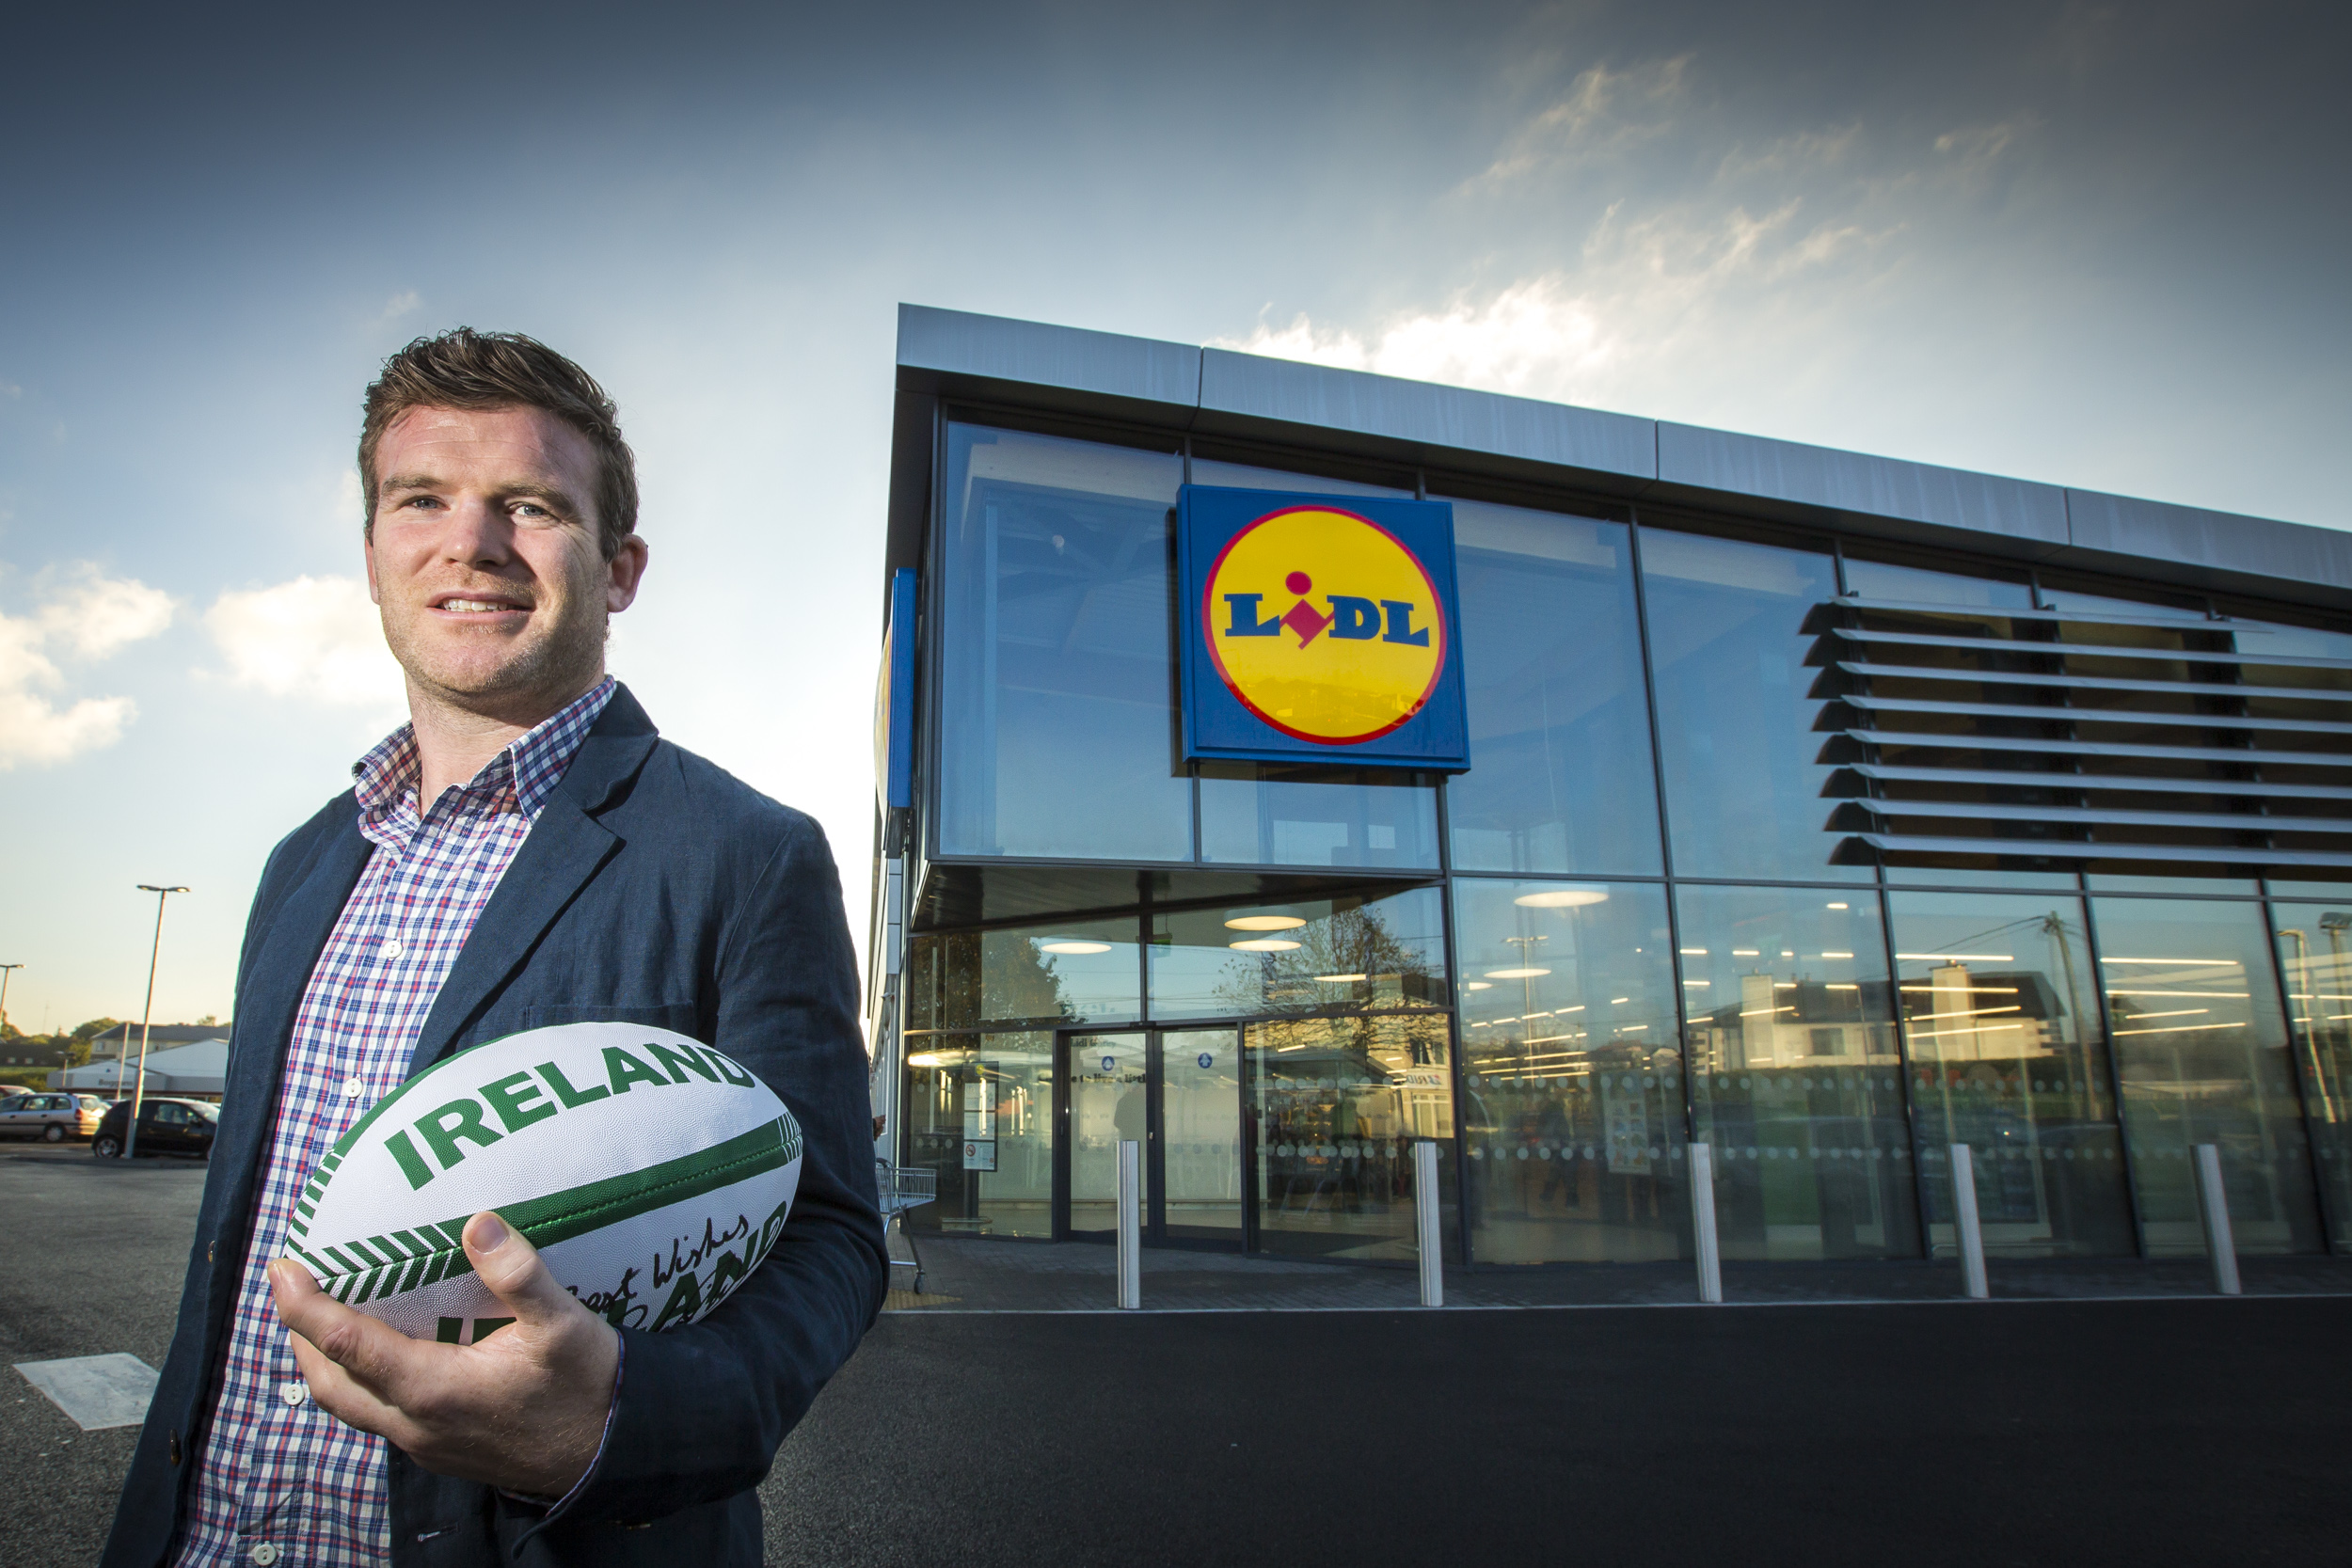 Lidl contributed more than half a billion Euro to the Irish economy in 2015